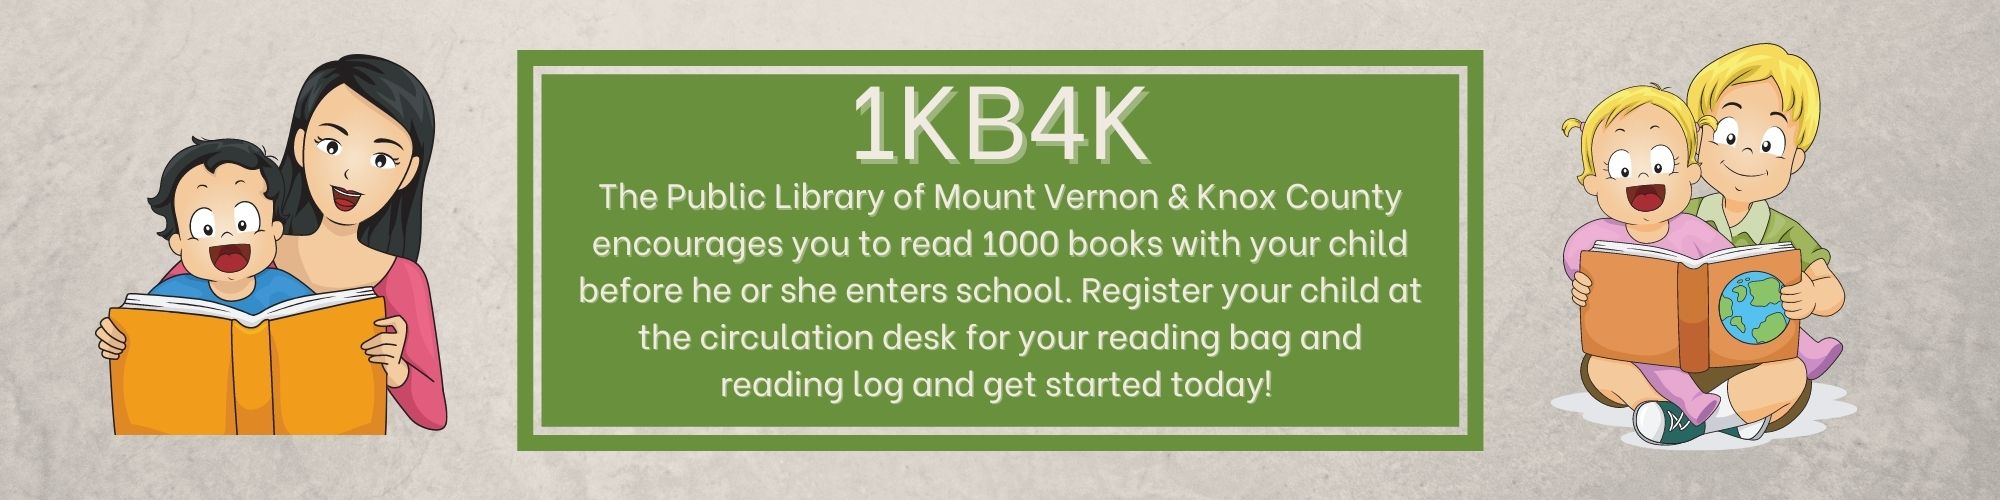 1KB4K The Public Library of Mount Vernon & Knox County encourages you to read 1000 books with your child before he or she enters school. Register your child at the circulation desk for your reading bag and reading log and get started today!